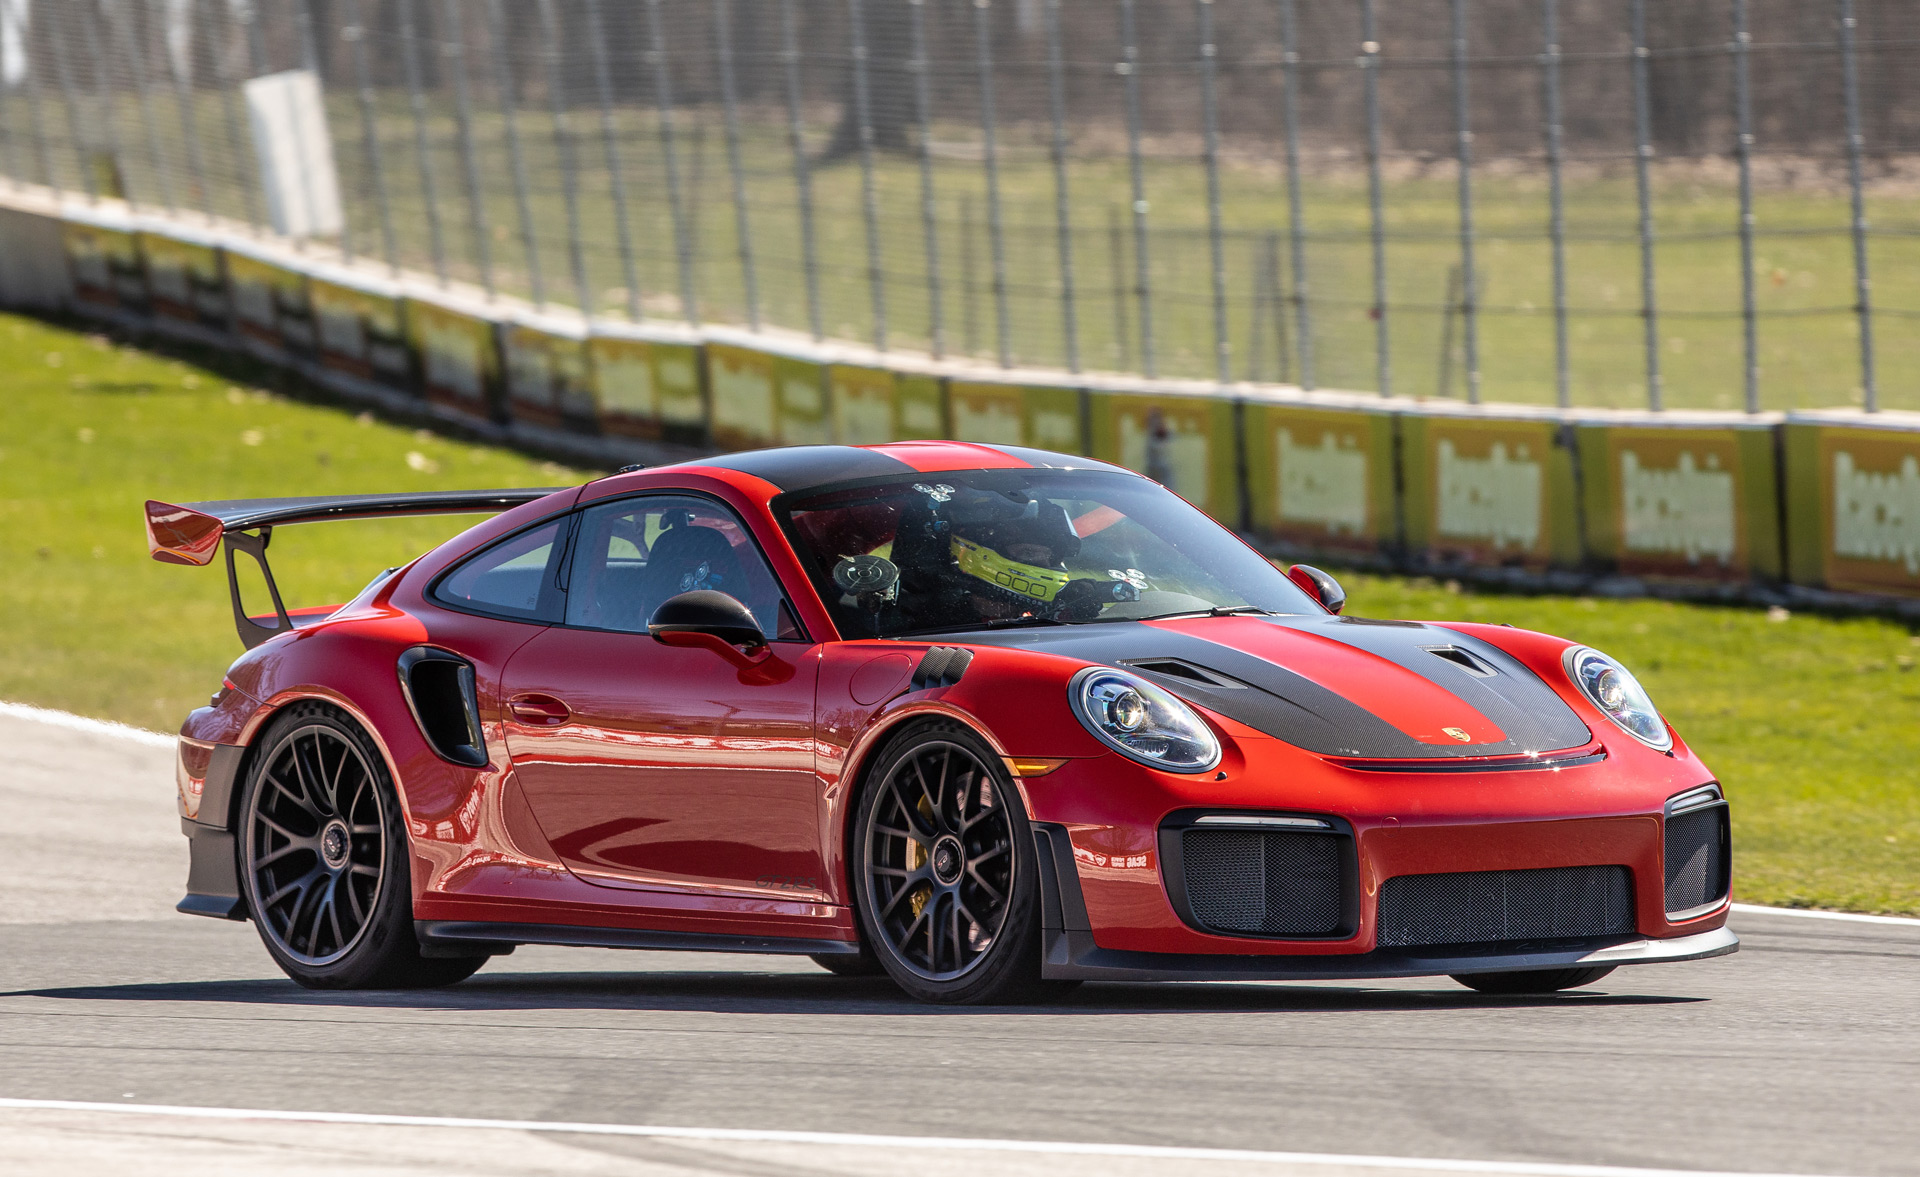 2018 Porsche 911 GT2 RS is now the fastest production car at Road America